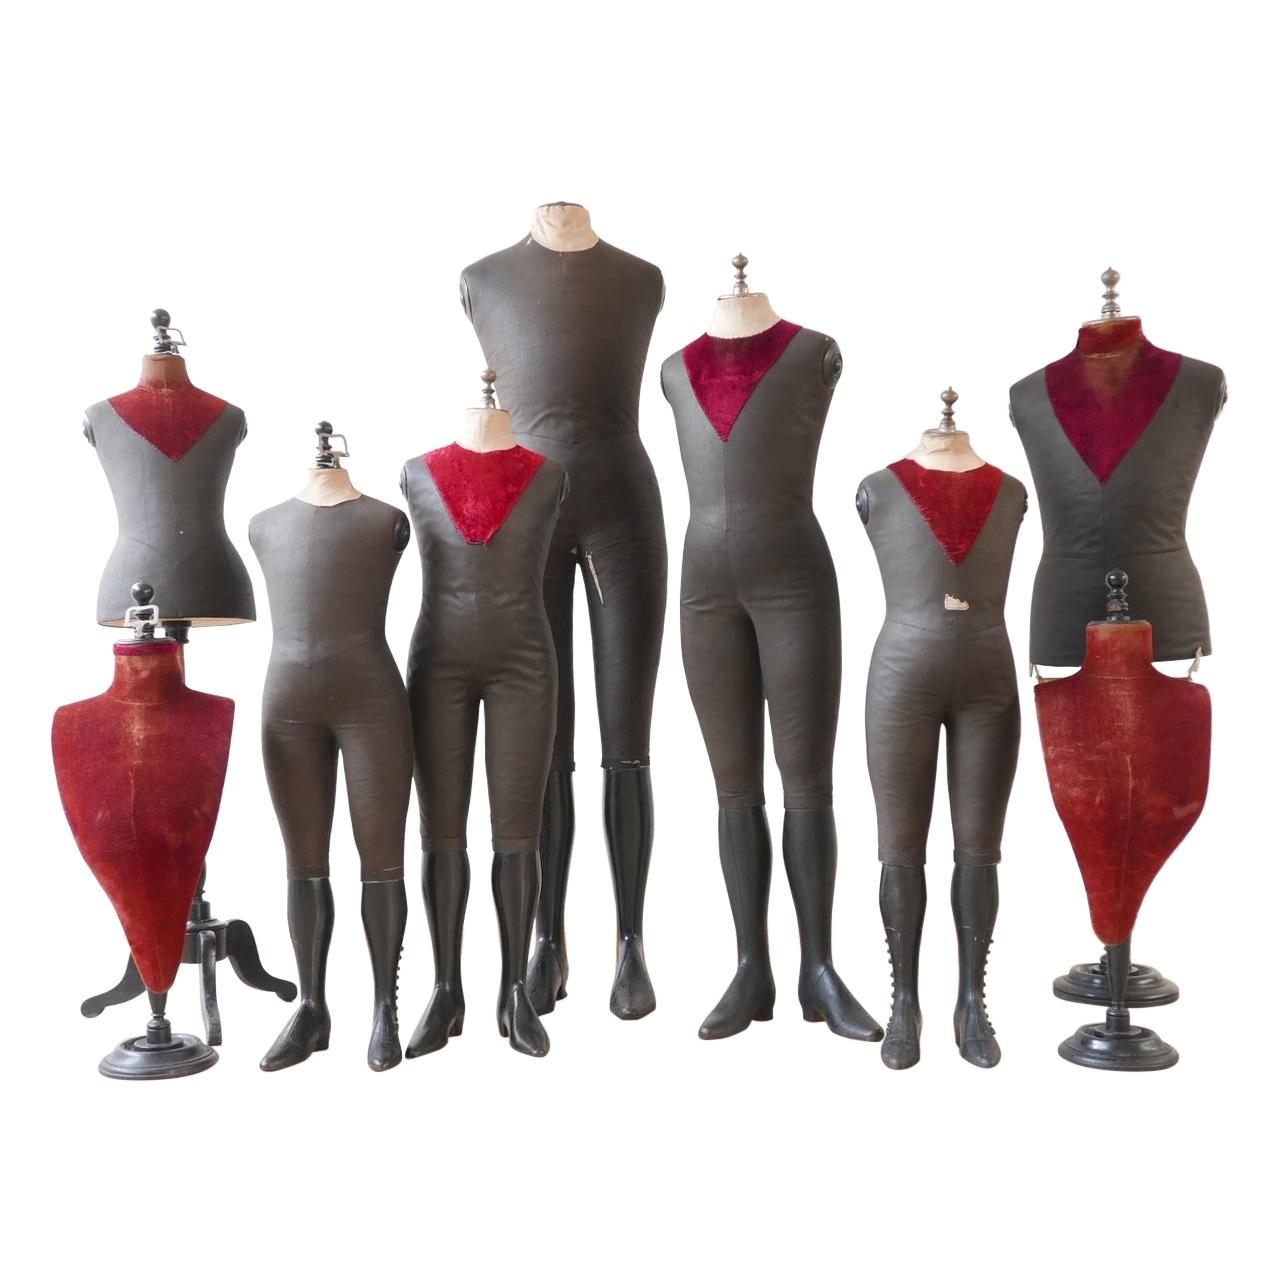 Stockman Mannequin Collection '9'